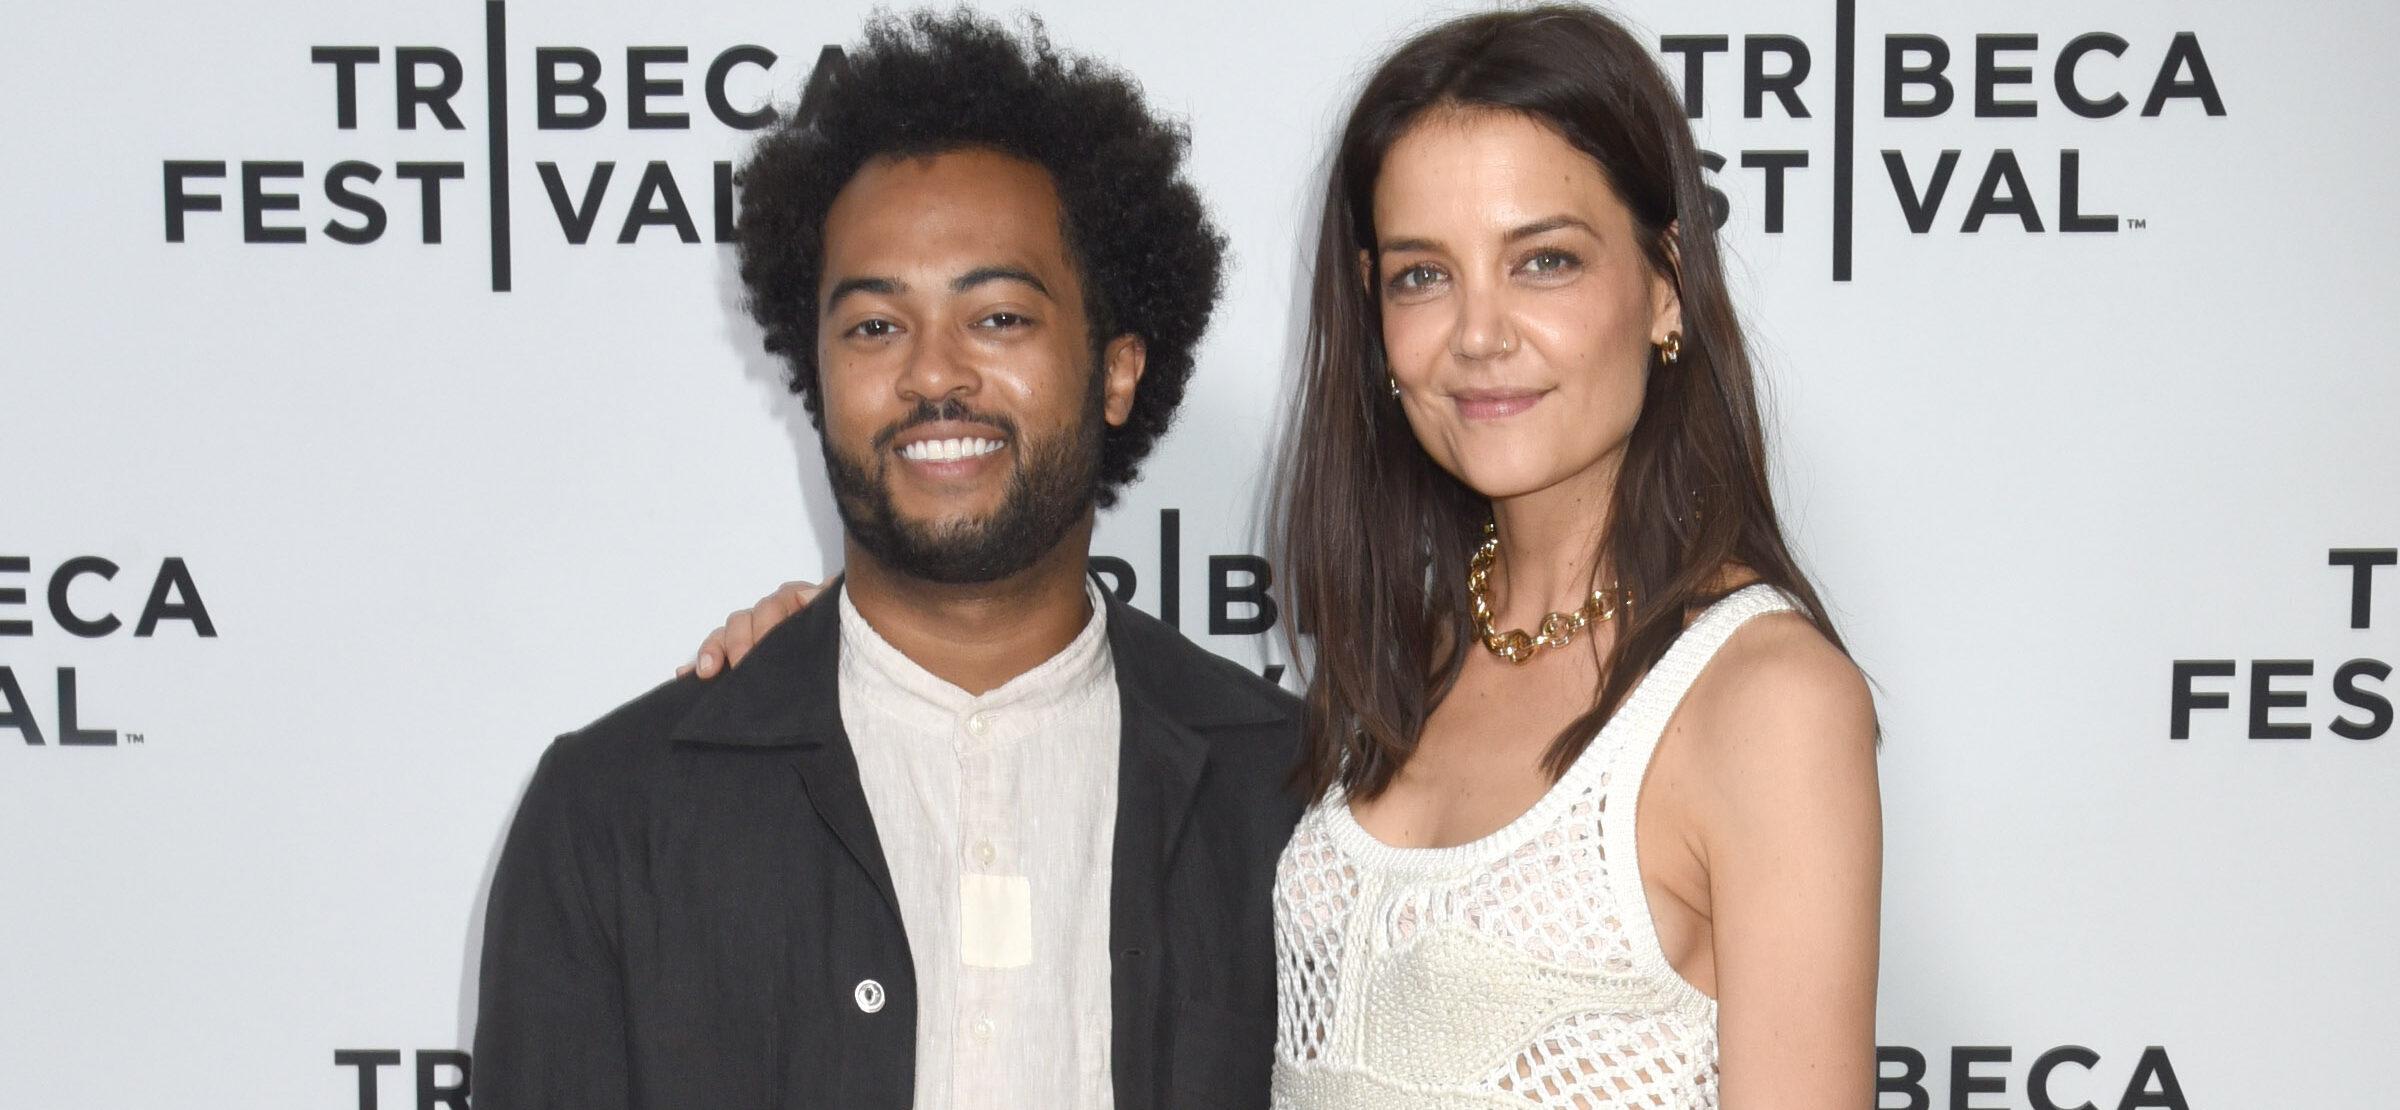 2022 Tribeca Film Festival World Premiere of "ALONE TOGETHER”, at the SVA Theater 1 Silas in New York, New York, USA, 14 June 2022. 14 Jun 2022 Pictured: Bobby Wooten III and Katie Holmes.